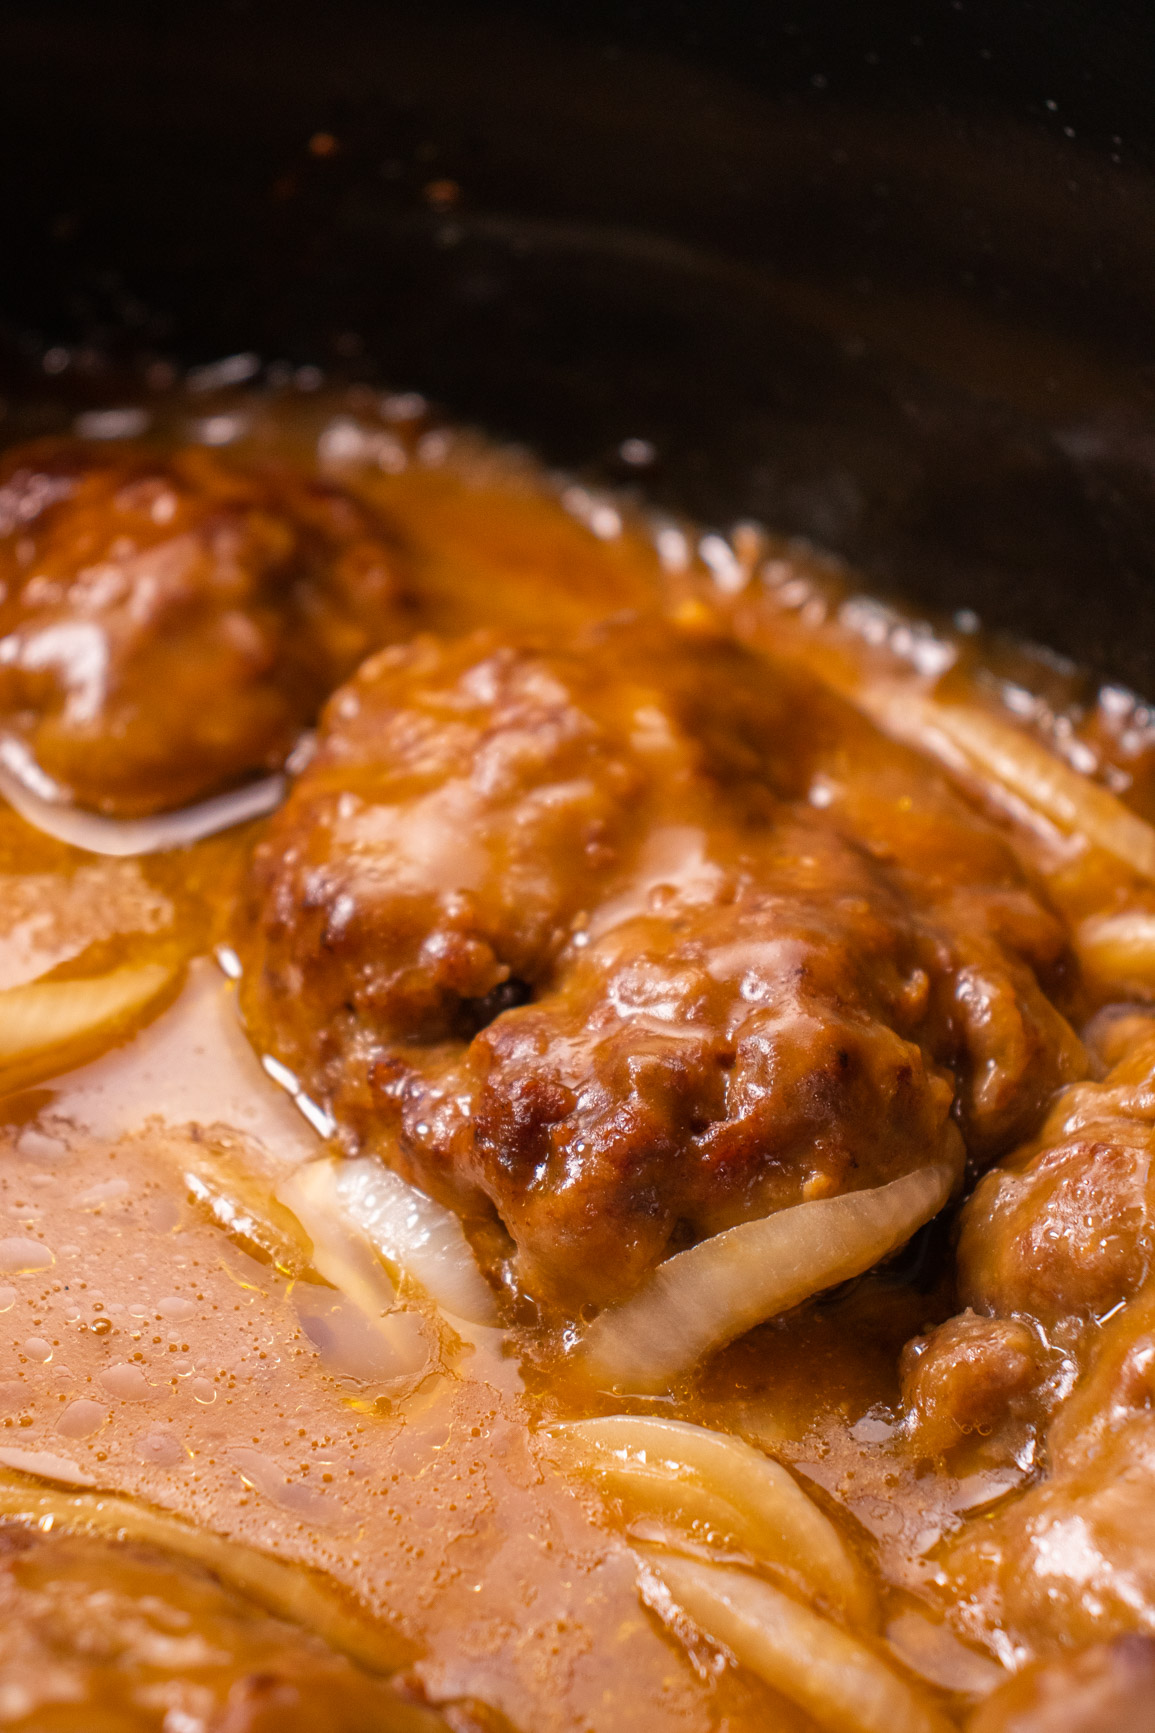 Slow Cooker Salisbury Steak (+Video) - The Country Cook